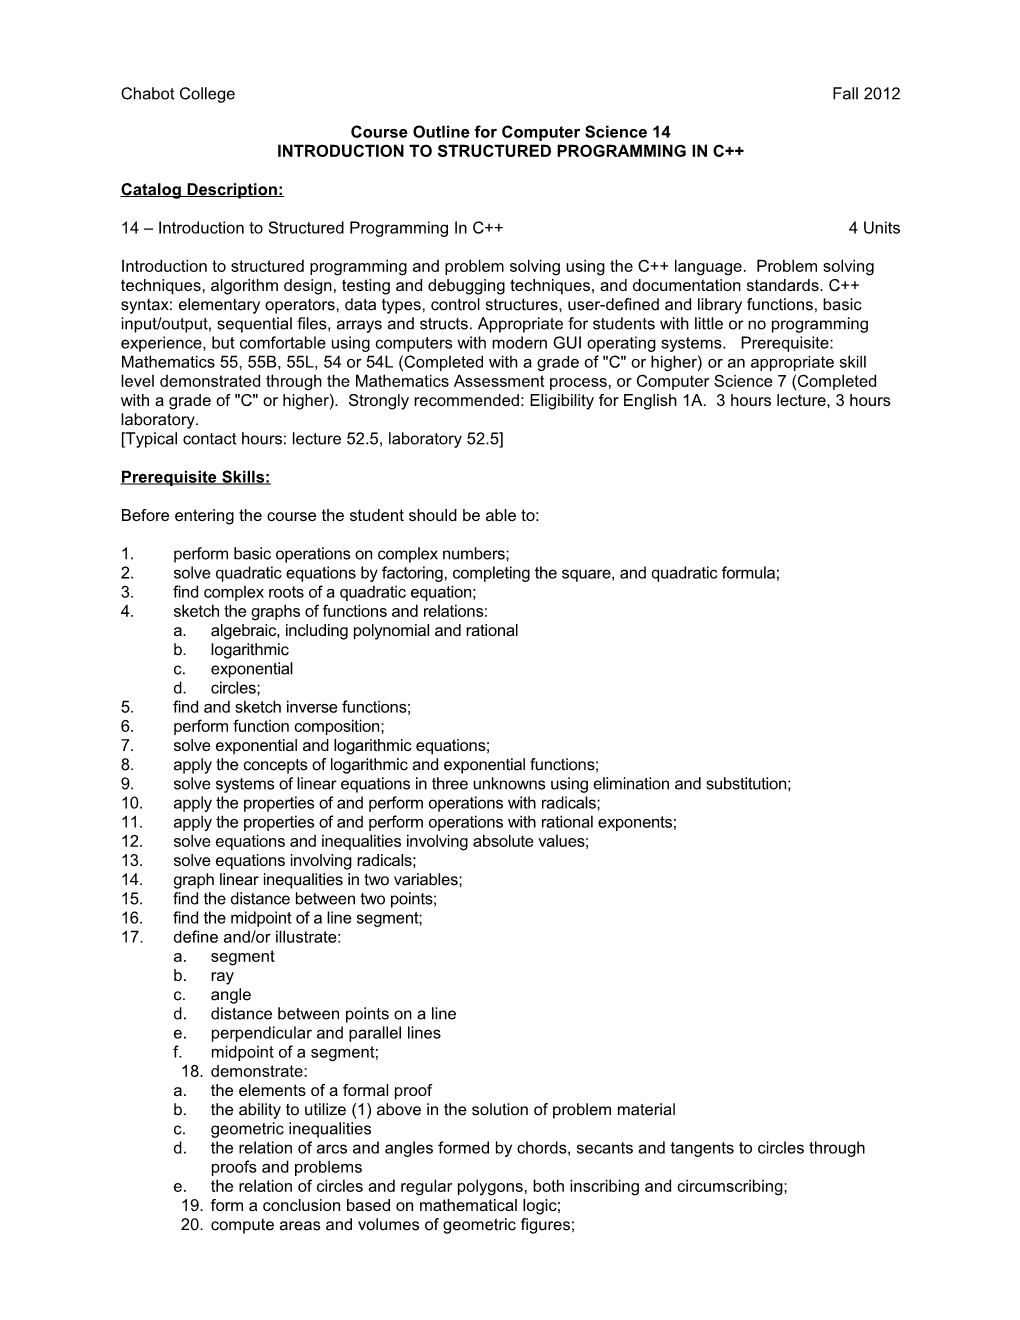 Course Outline for Computer Science 14, Page 4